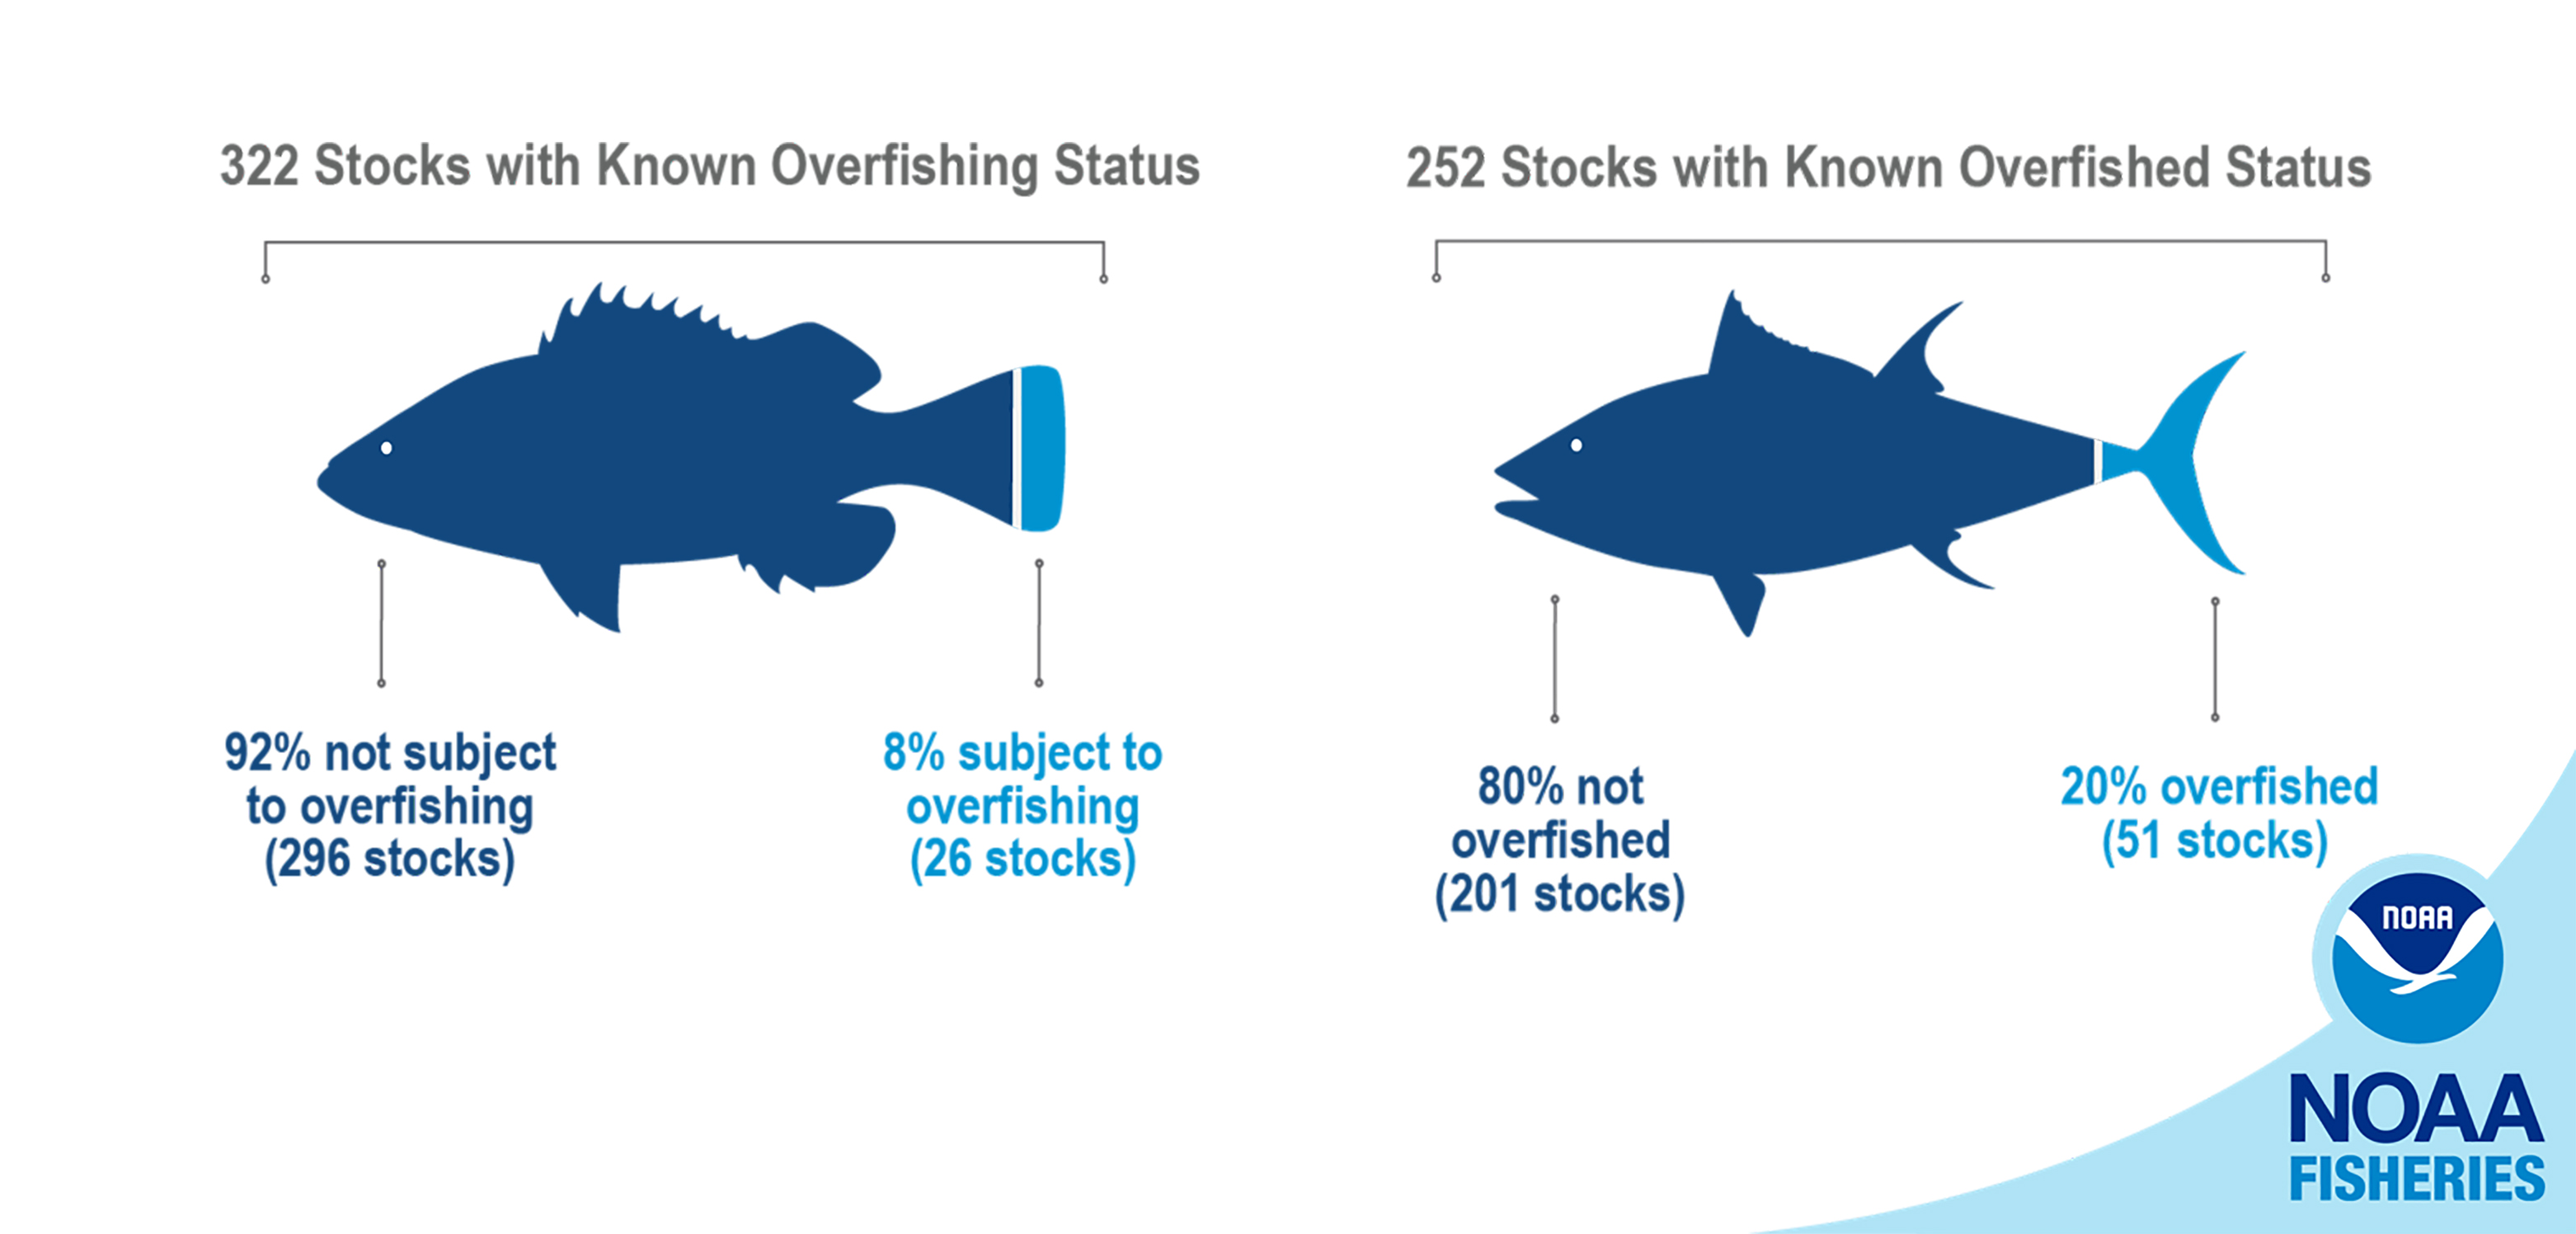 Of the more than 460 stocks managed by NOAA, 322 have a known overfishing status (296 not subject to overfishing and 26 subject to overfishing) and 252 have a known overfished status (201 not overfished and 51 overfished). 